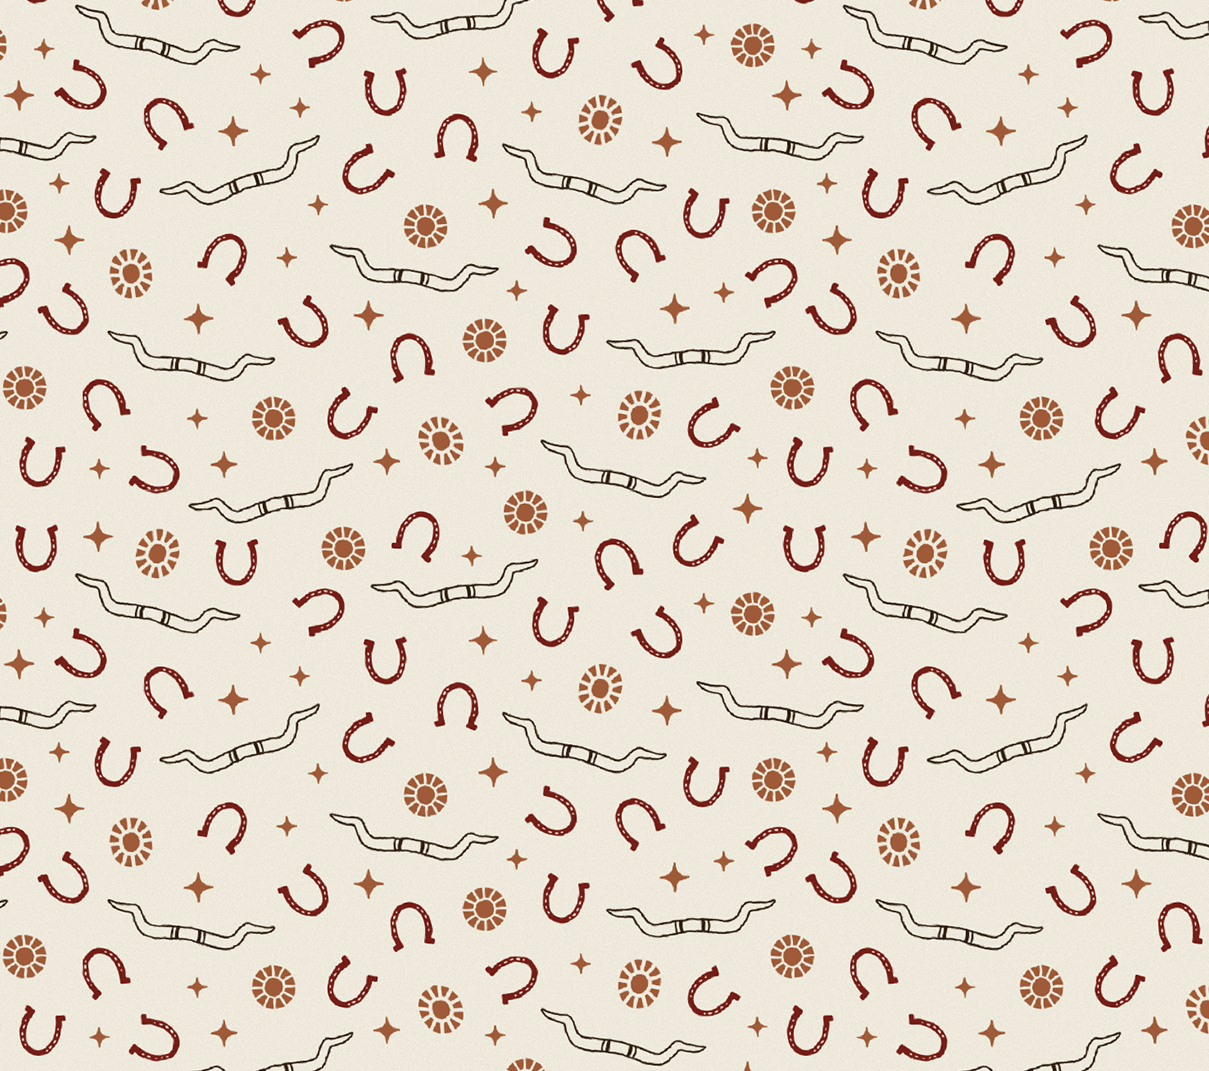 A pattern of horseshoes, gems, stars, and longhorns sits on a cream background